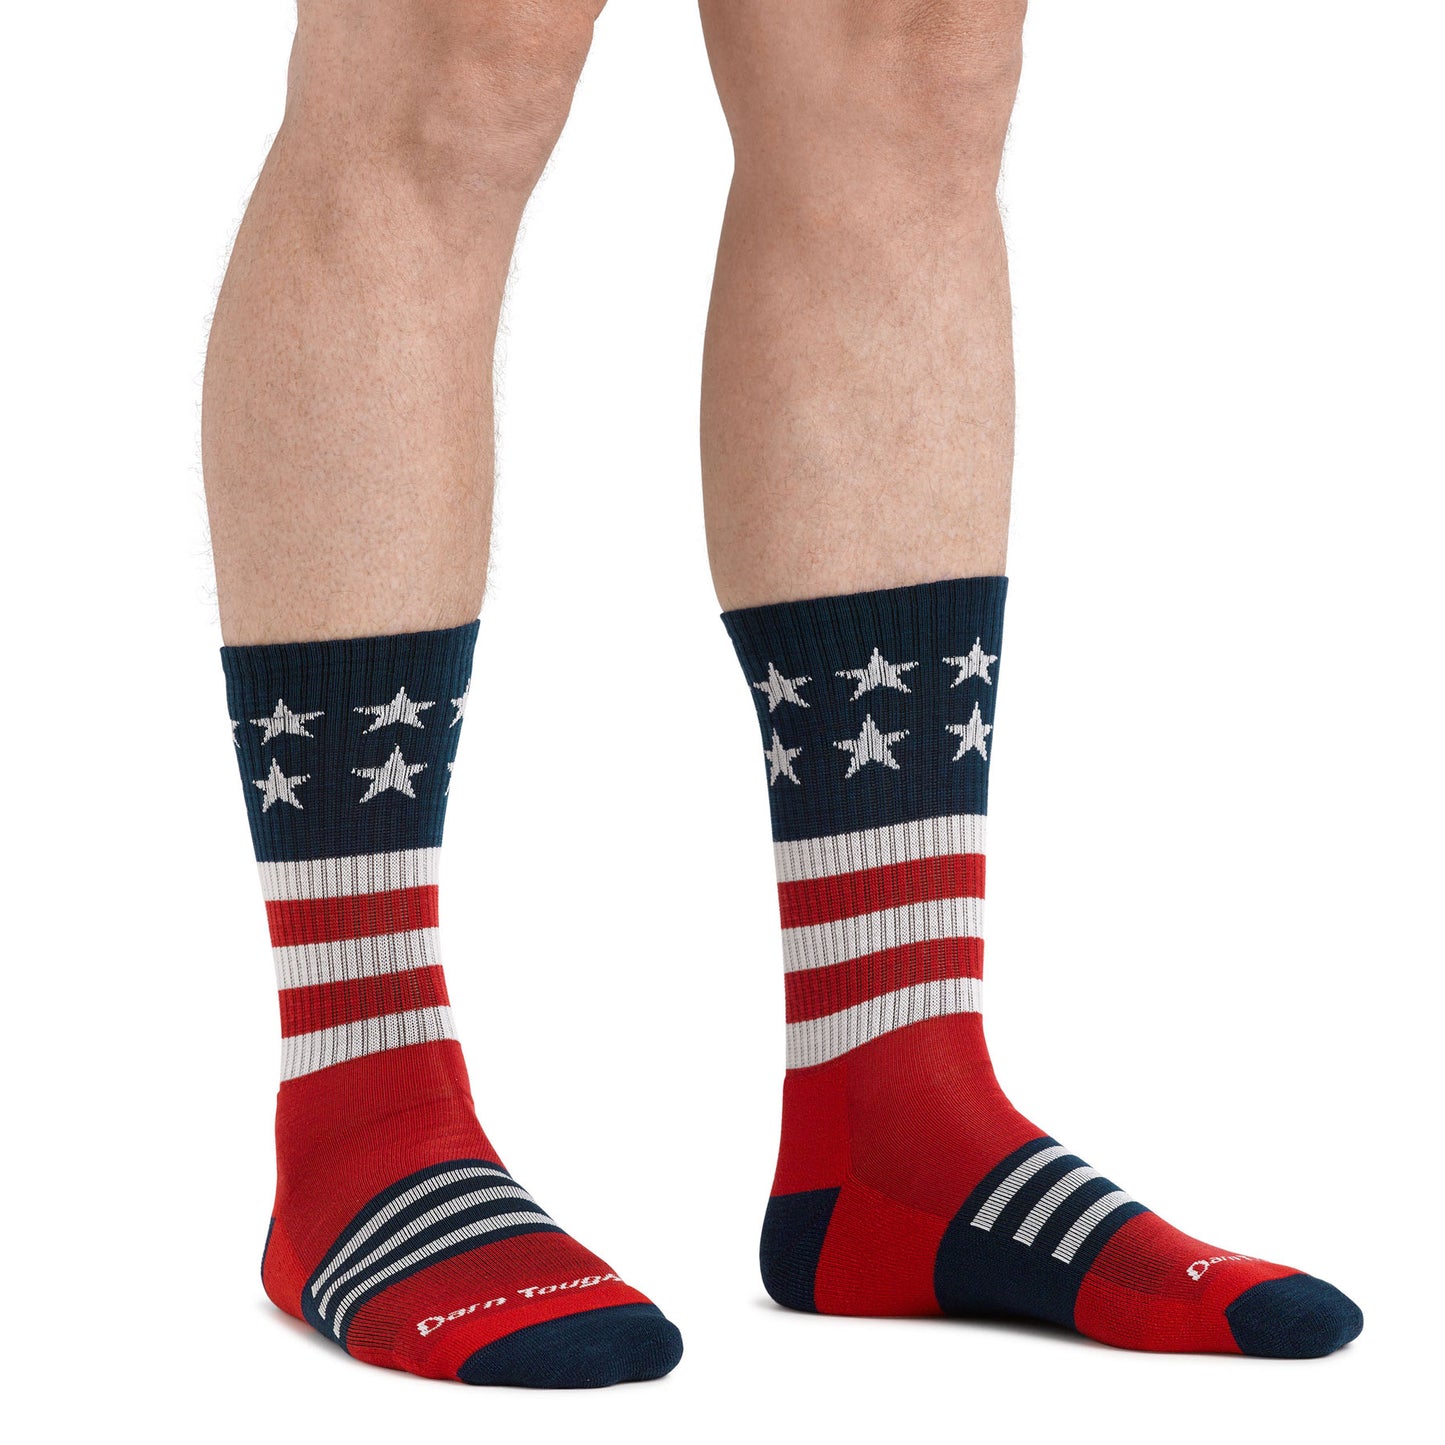 Darn Tough 1976 red white and blue stars and stripes socks on model